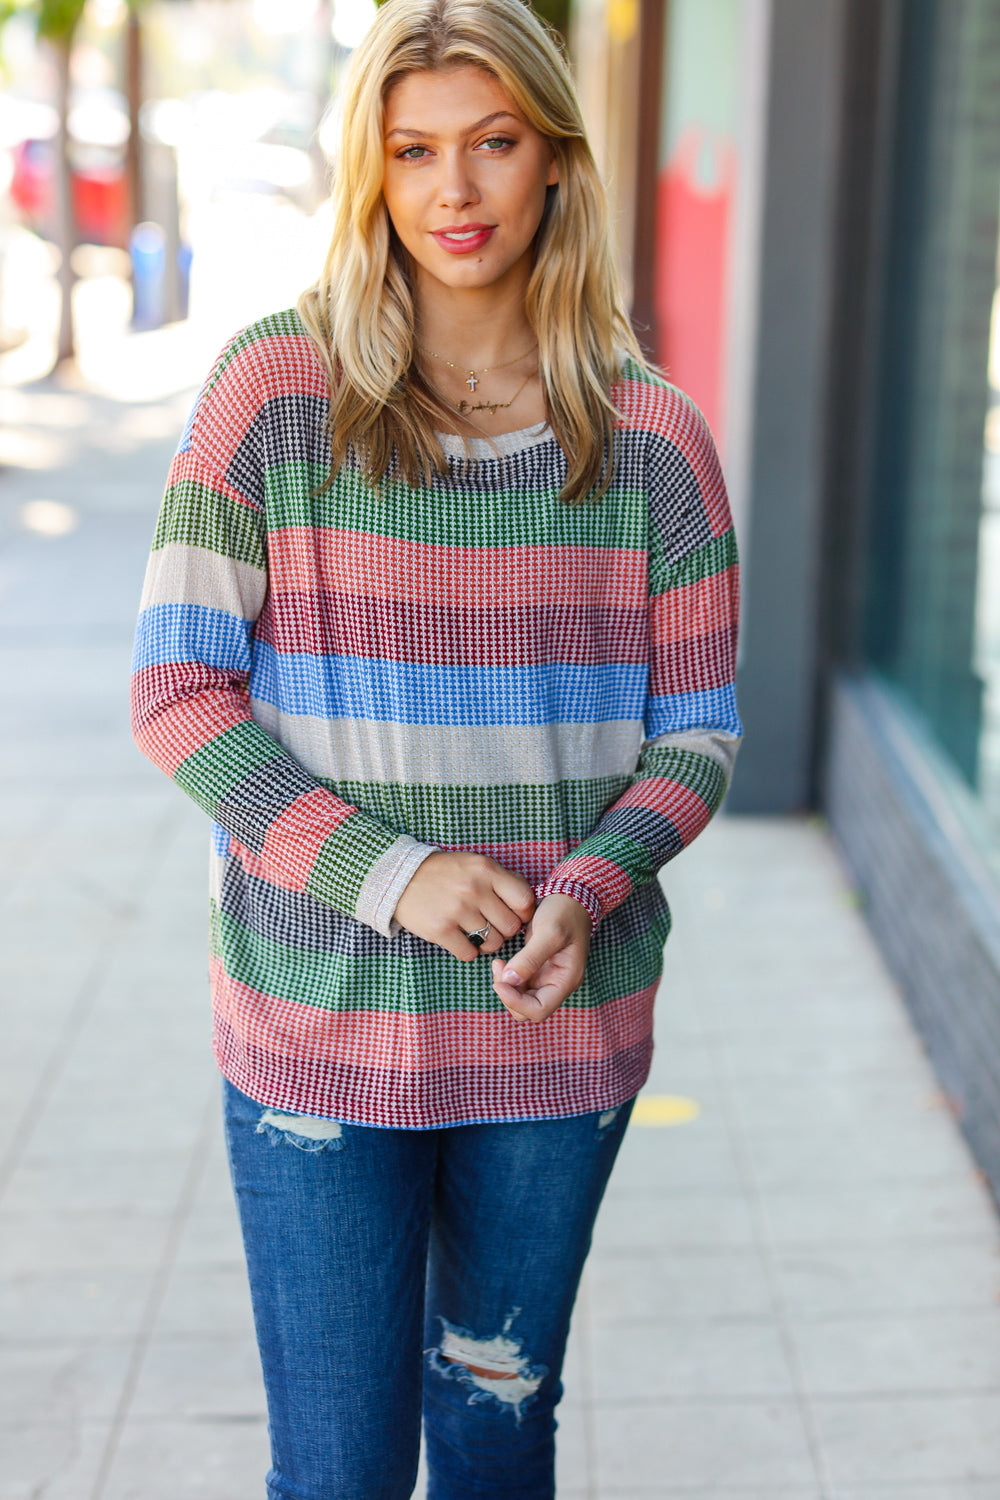 Ready For Action - Textured Vintage Stripe Top